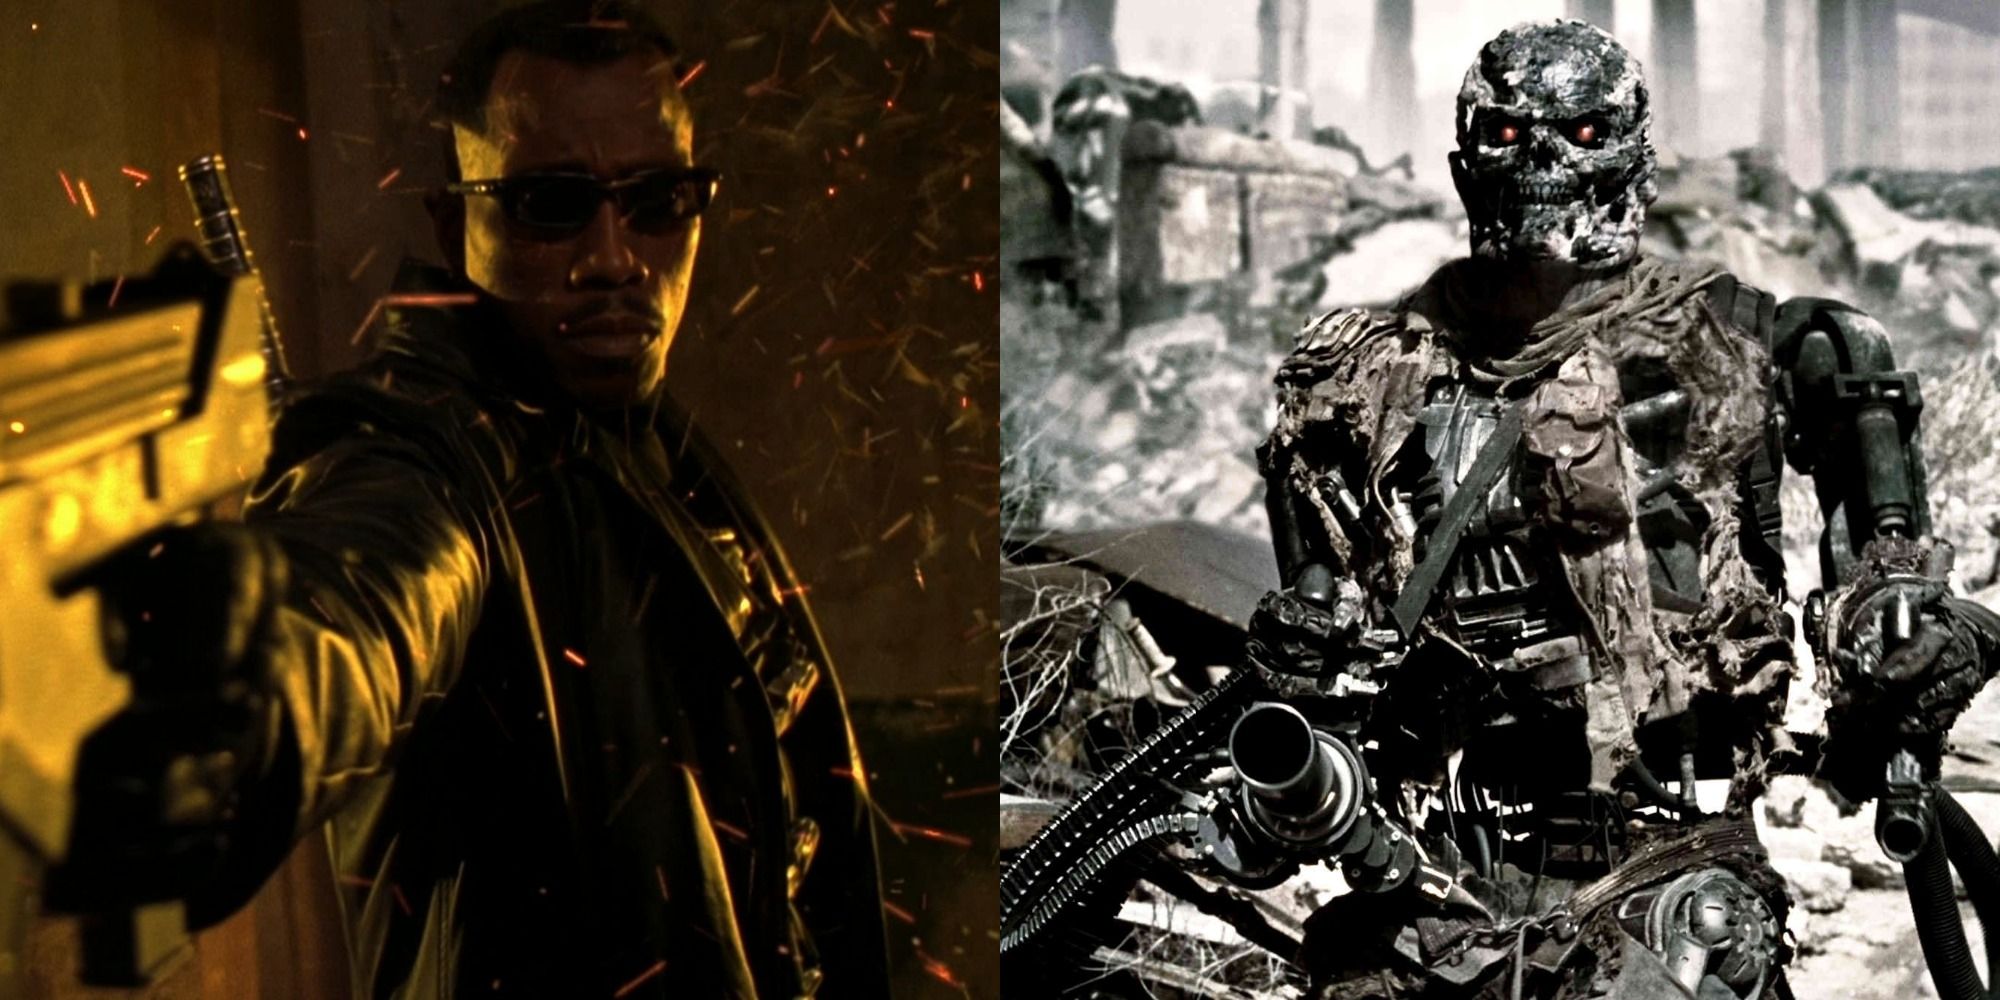 Split image of Blade nad a Terminator from Salvation